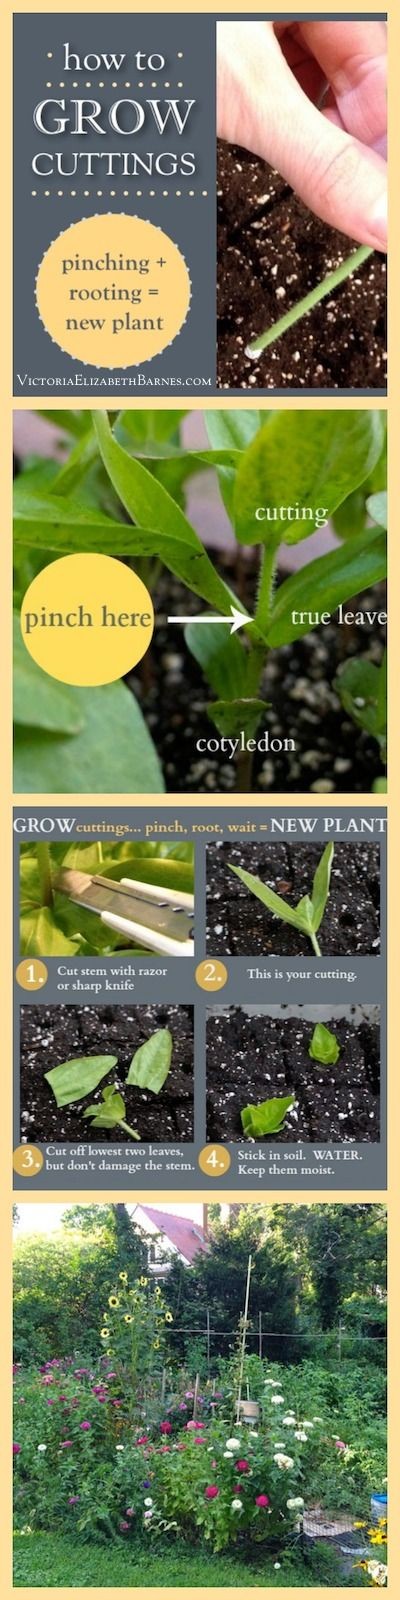 How to grow plant cuttings. Step-by-step instructi...